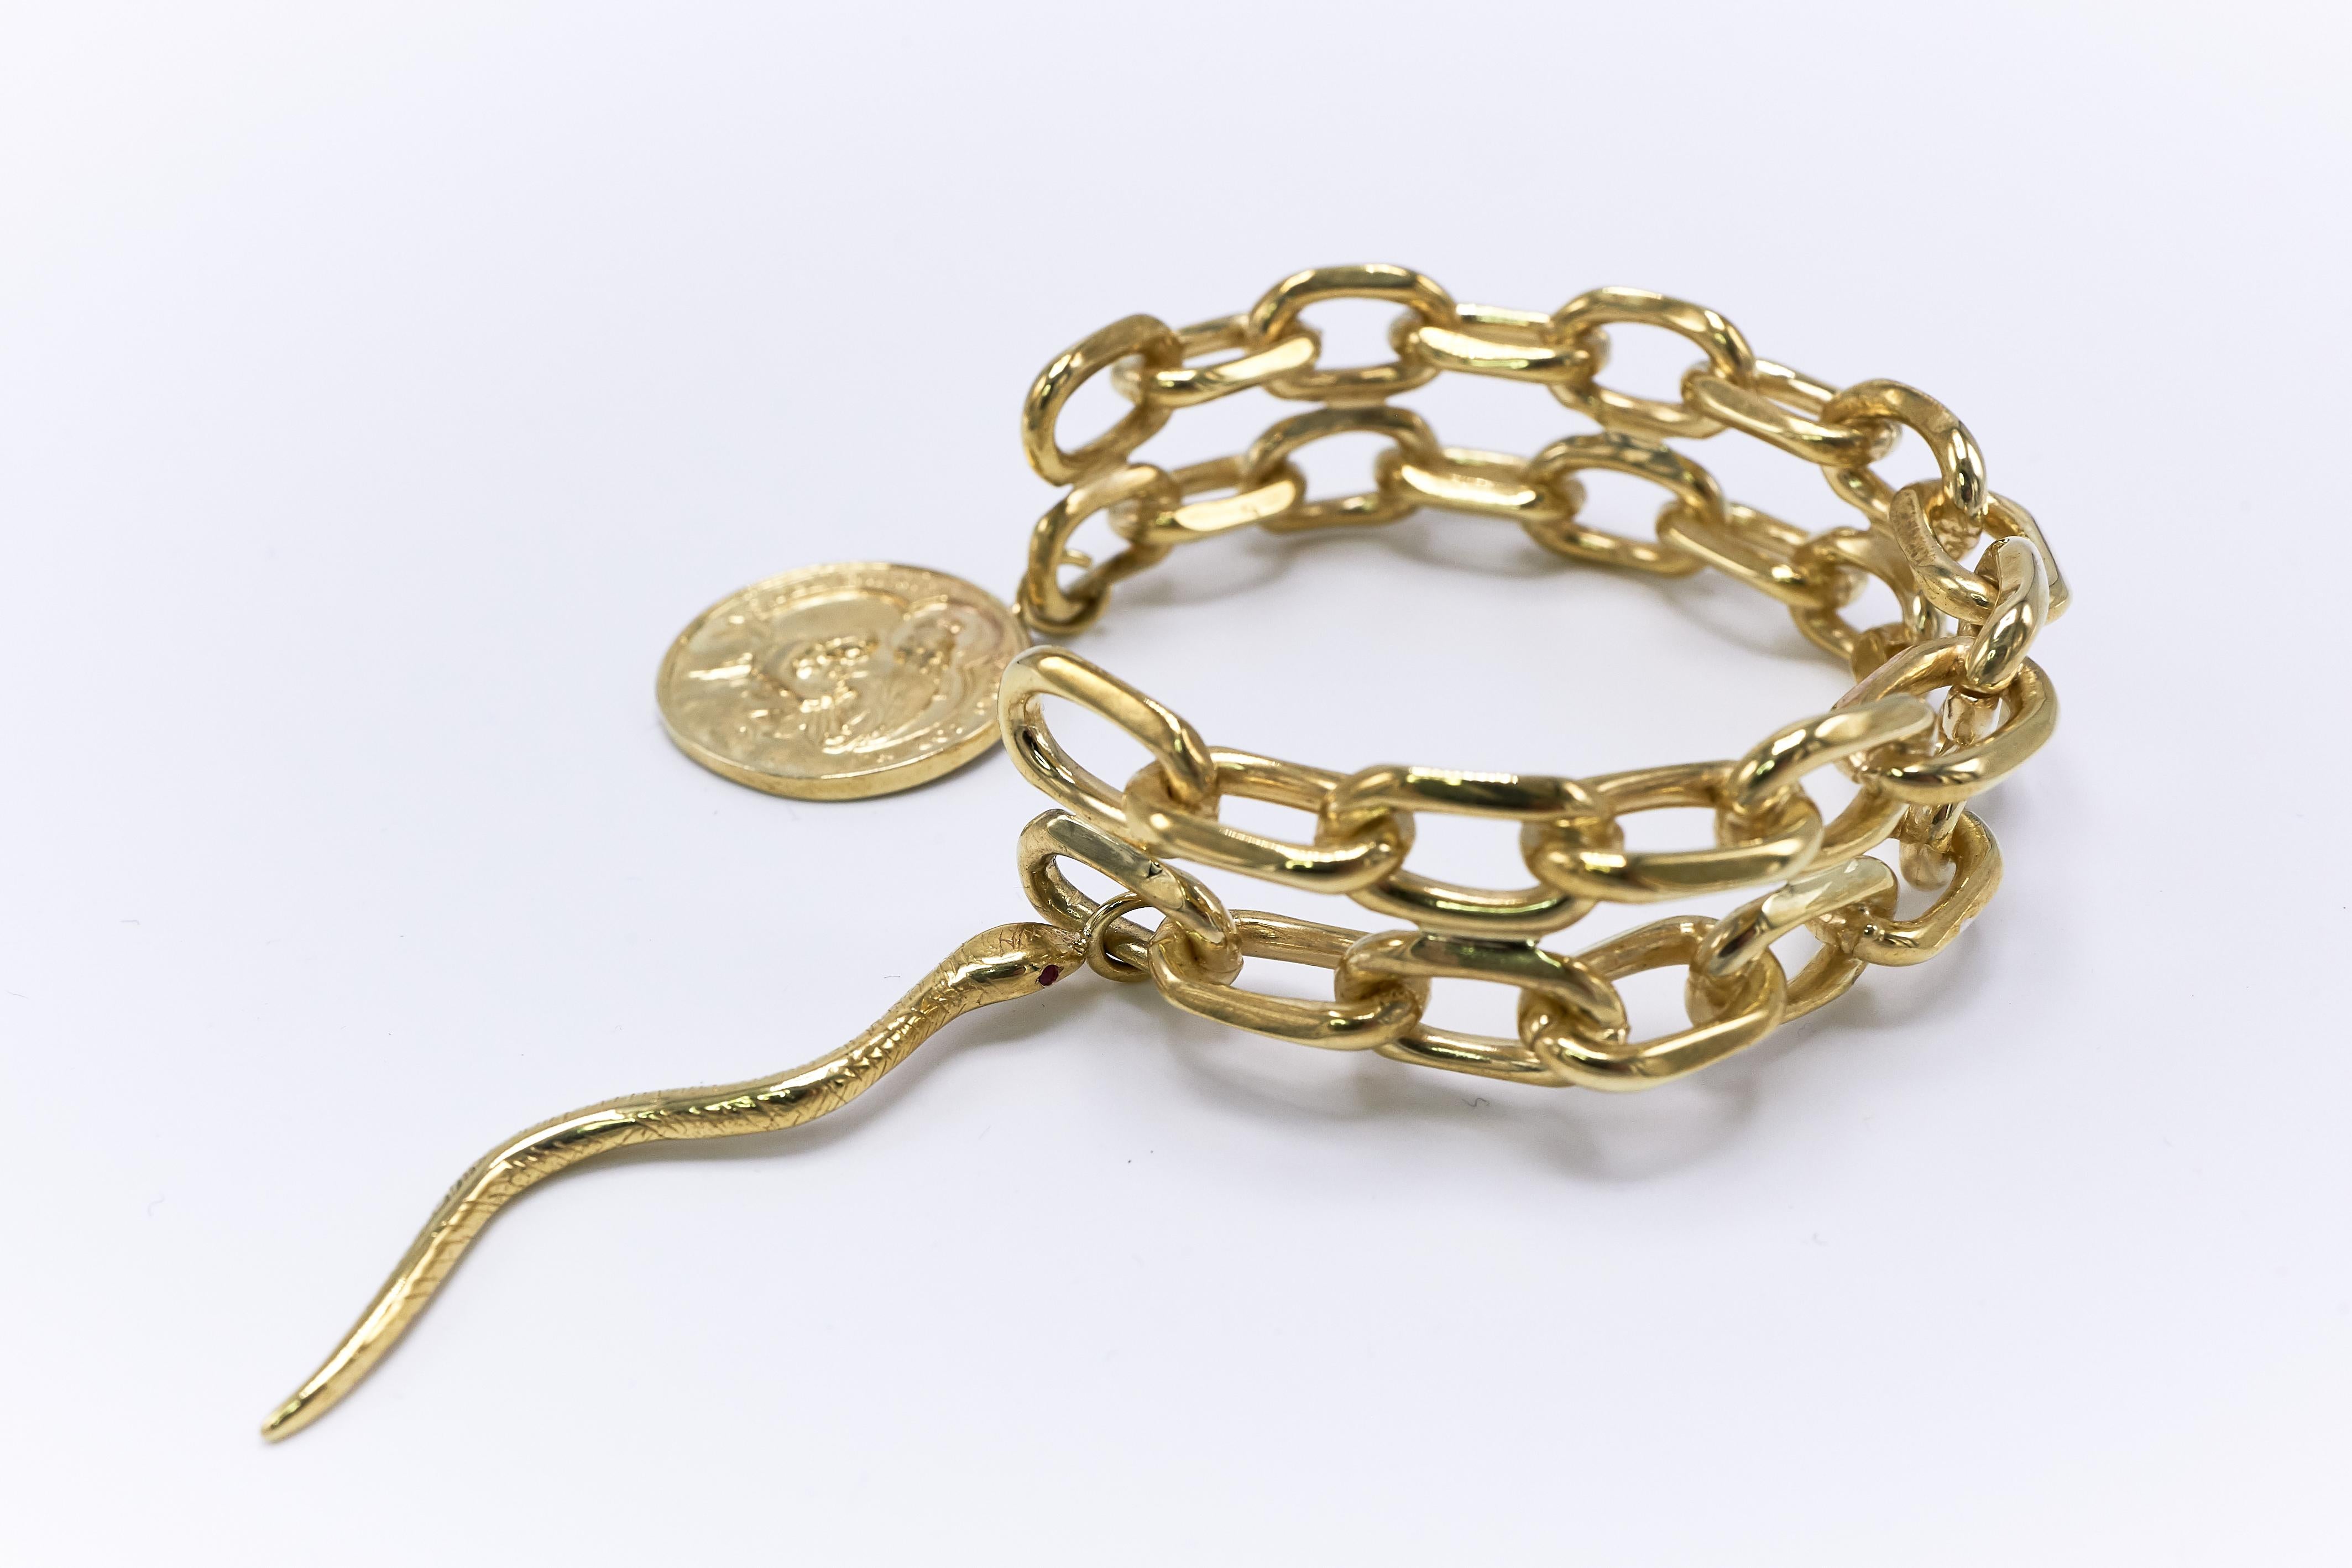 Contemporary Statement Chunky Chain Cuff Bangle Bracelet Medal Gold Vermeil J Dauphin For Sale